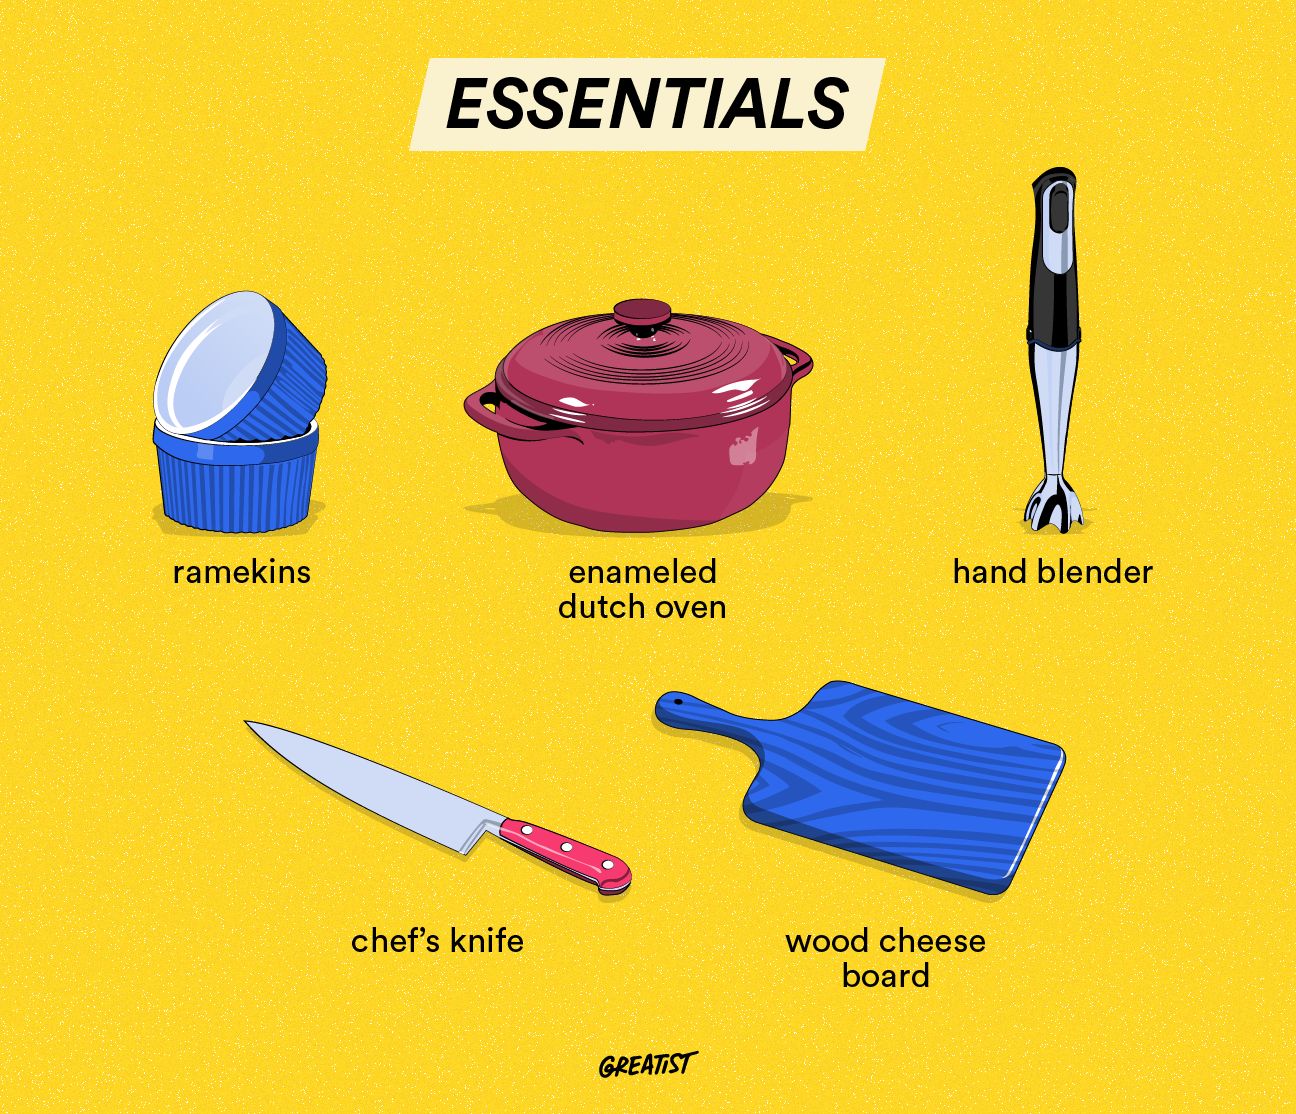 List of kitchen tools & cooking utensils in French - Frenchanted